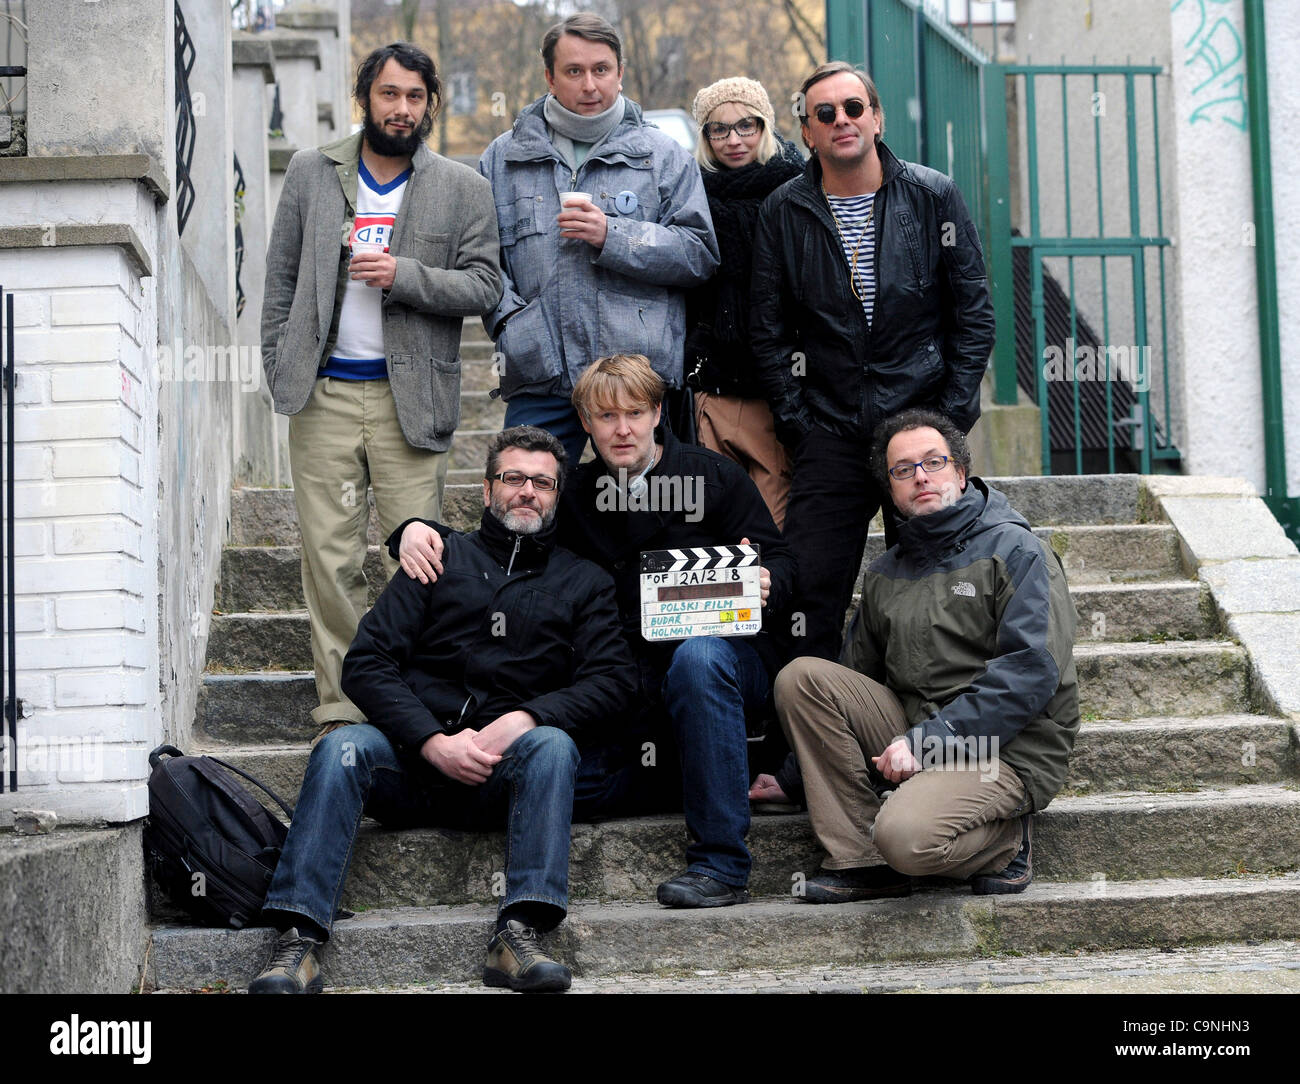 Czech actors, directors and screenwriter during the final shooting of movie Polski film, in Prague, Czech Republic, on January 16, 2012. The Upper row from the left actors Pavel Liska, Marek Daniel, Jana Plodkova, Tomas Matonoha, lower row from the left screenwriter Robert Geisler, director Marek Na Stock Photo